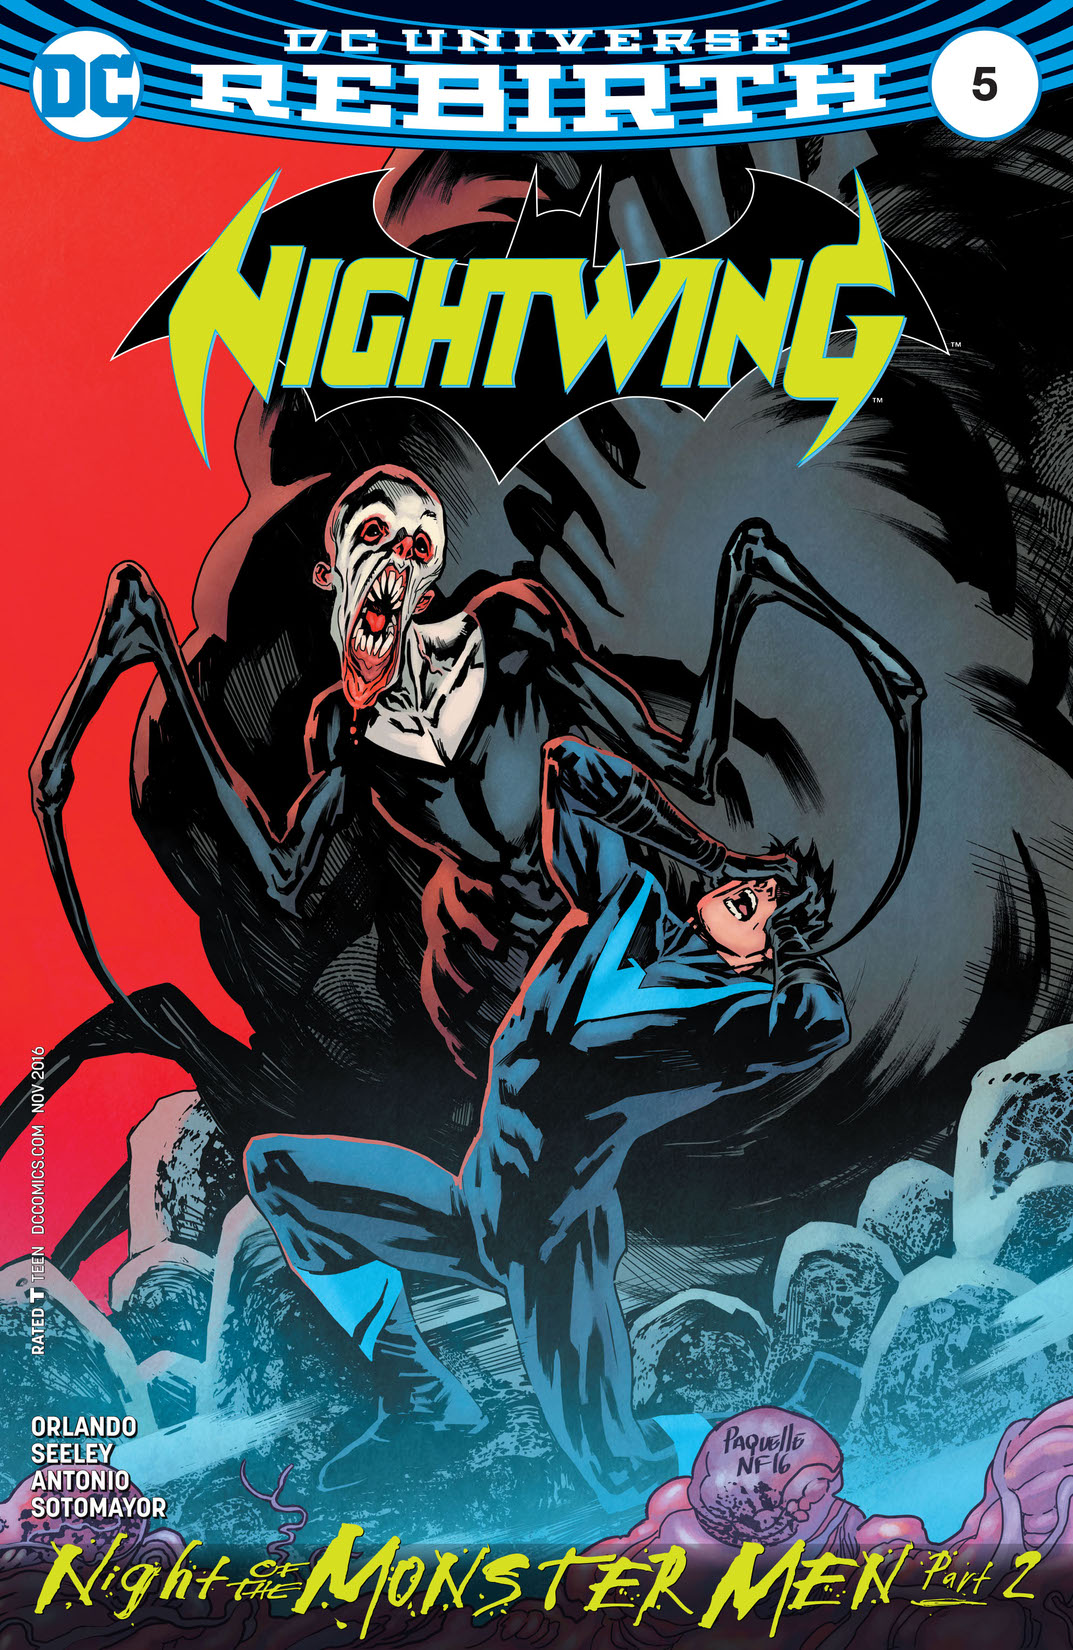 Nightwing (2016-) #5 preview images